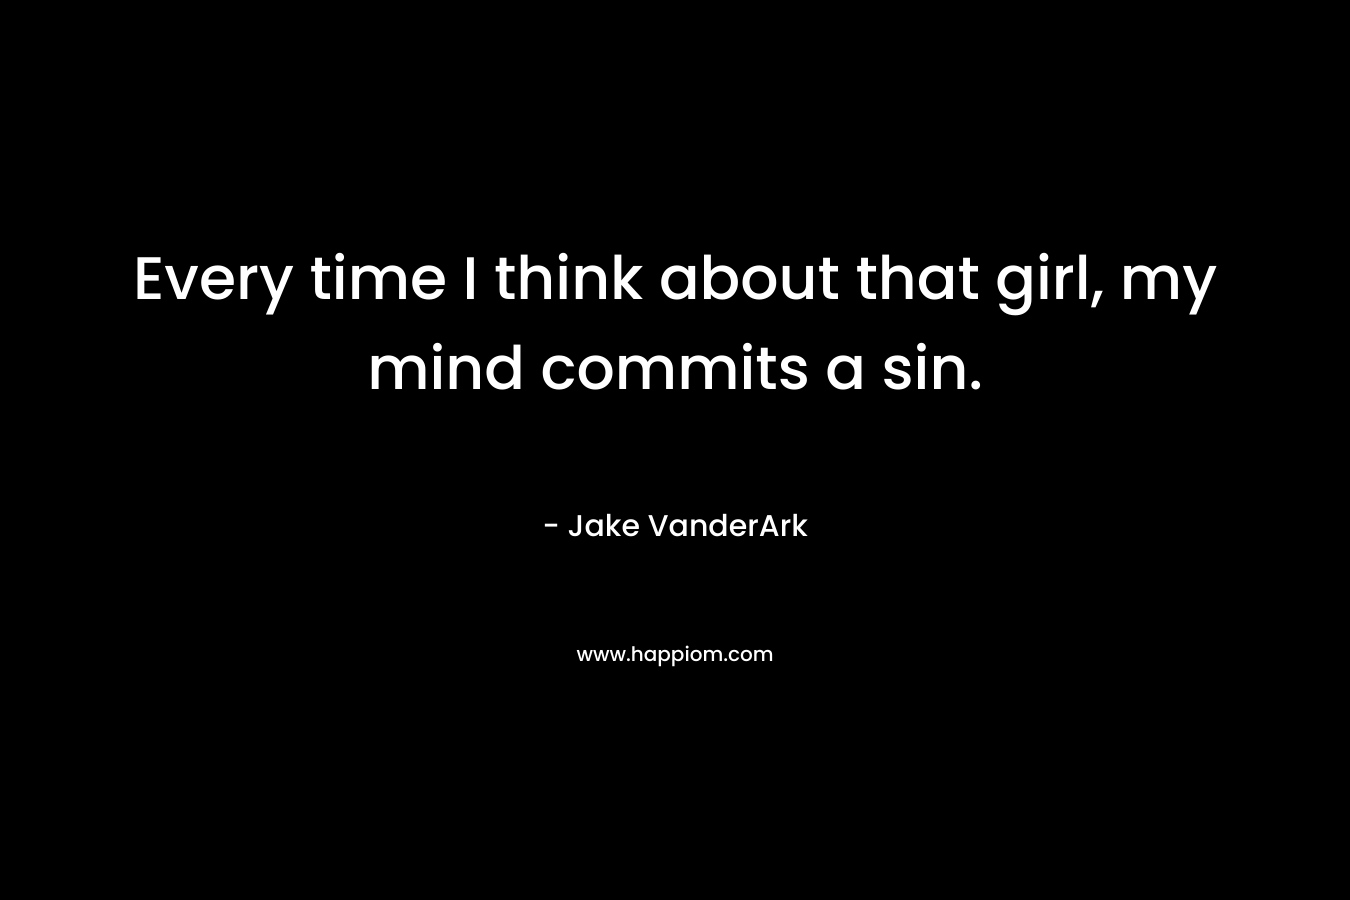 Every time I think about that girl, my mind commits a sin. – Jake VanderArk